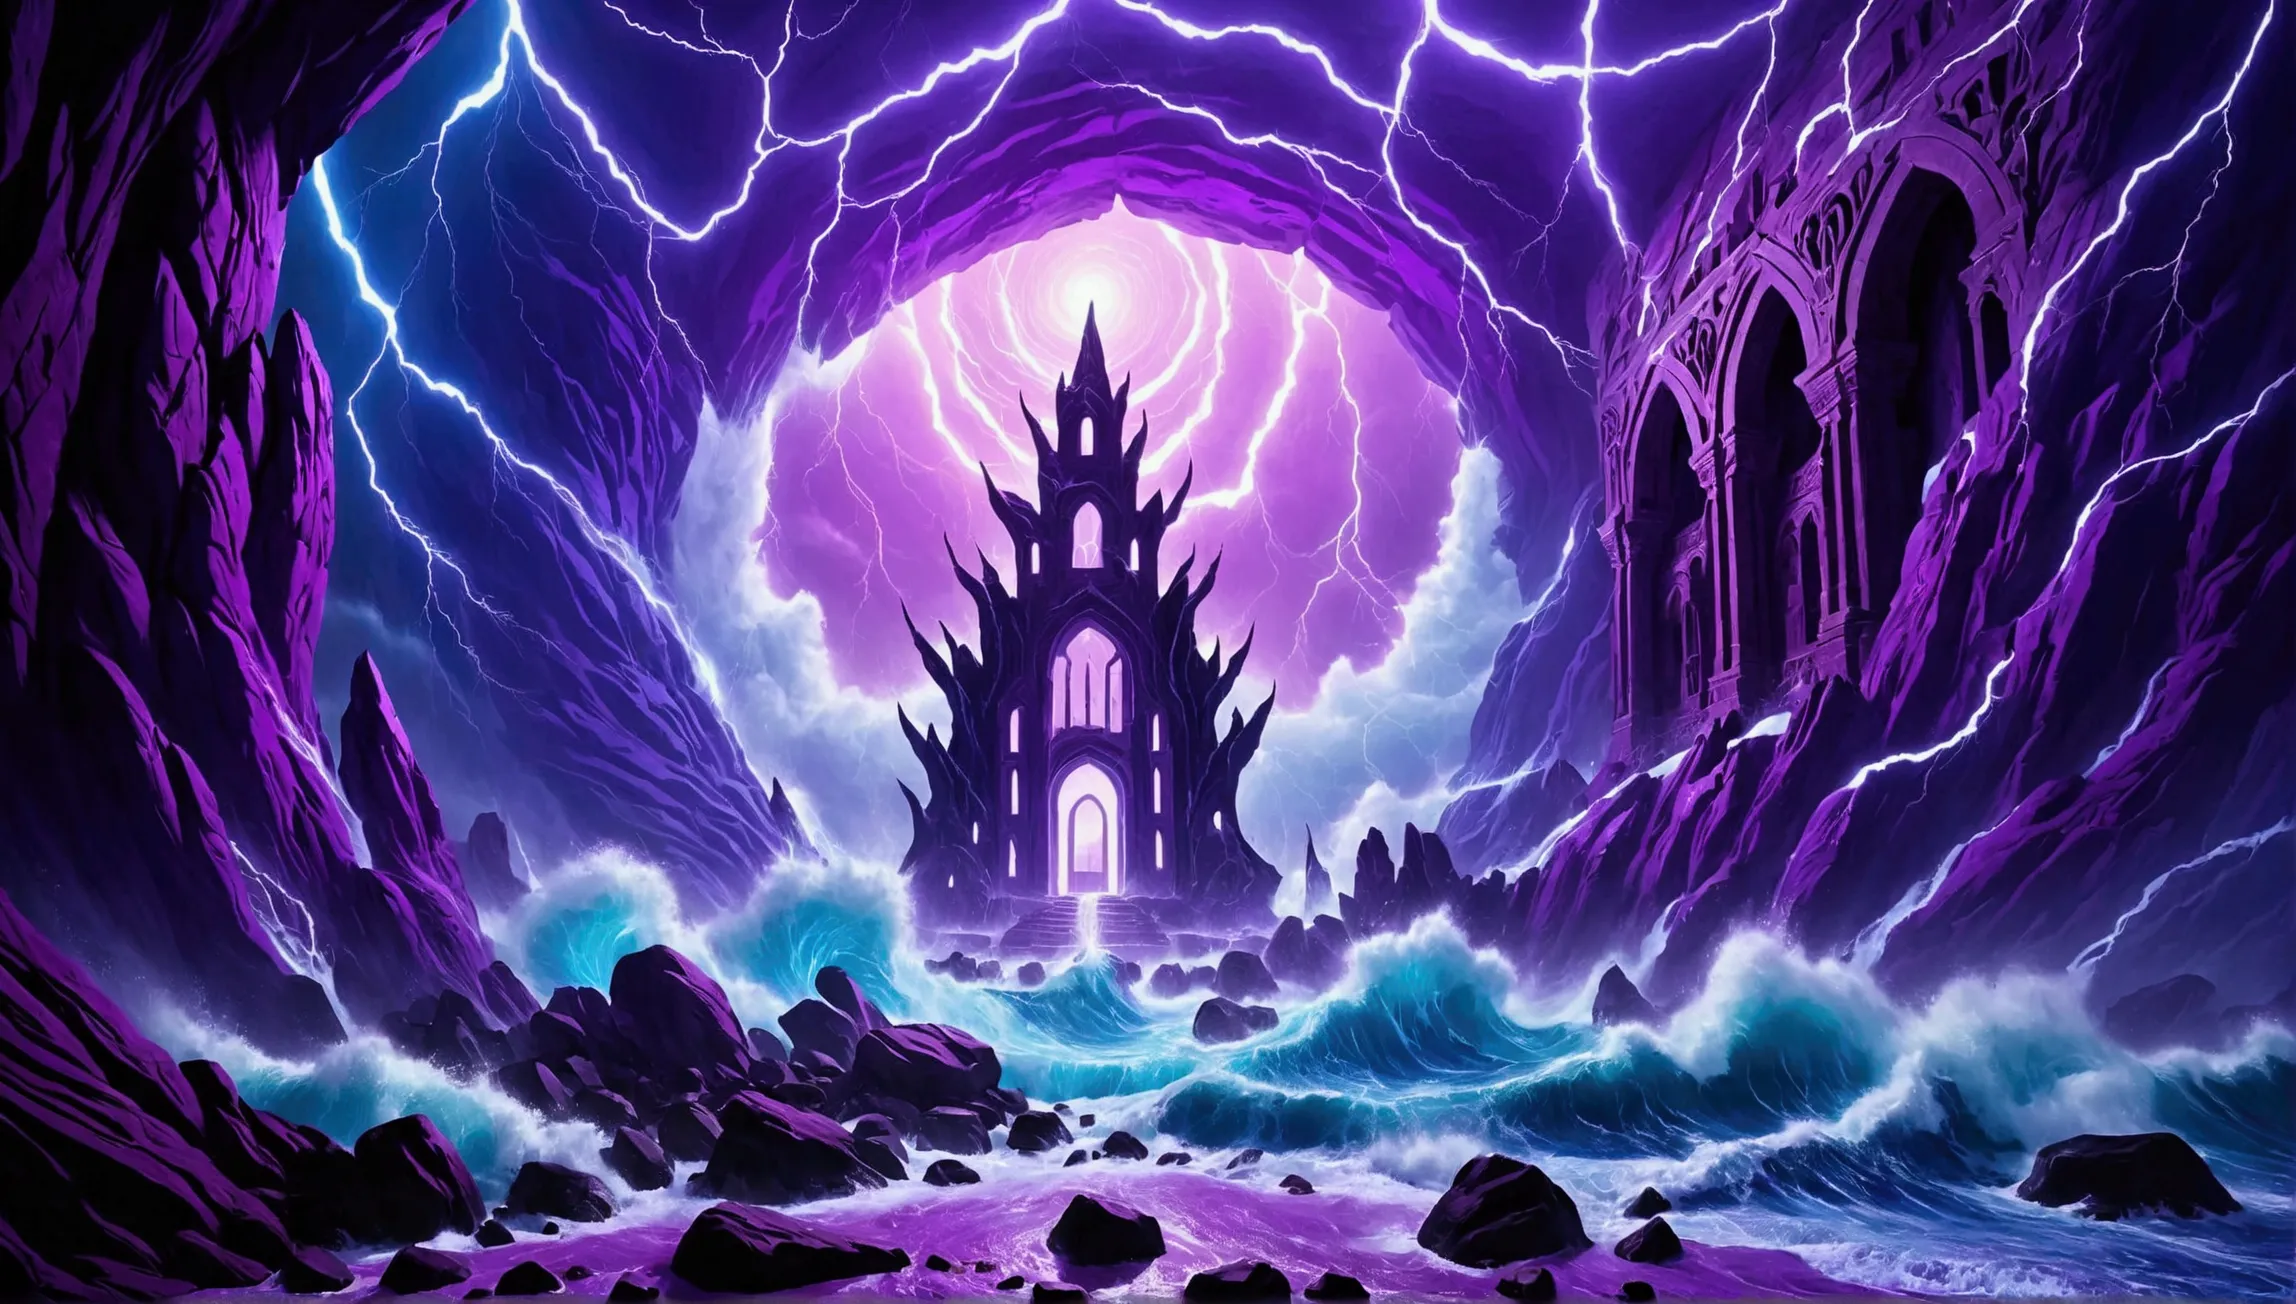 (Mysterious eerie citadel with intricate architecture:1.2) on rocks of tropical island))), crushing waves, purple-blue (otherwor...